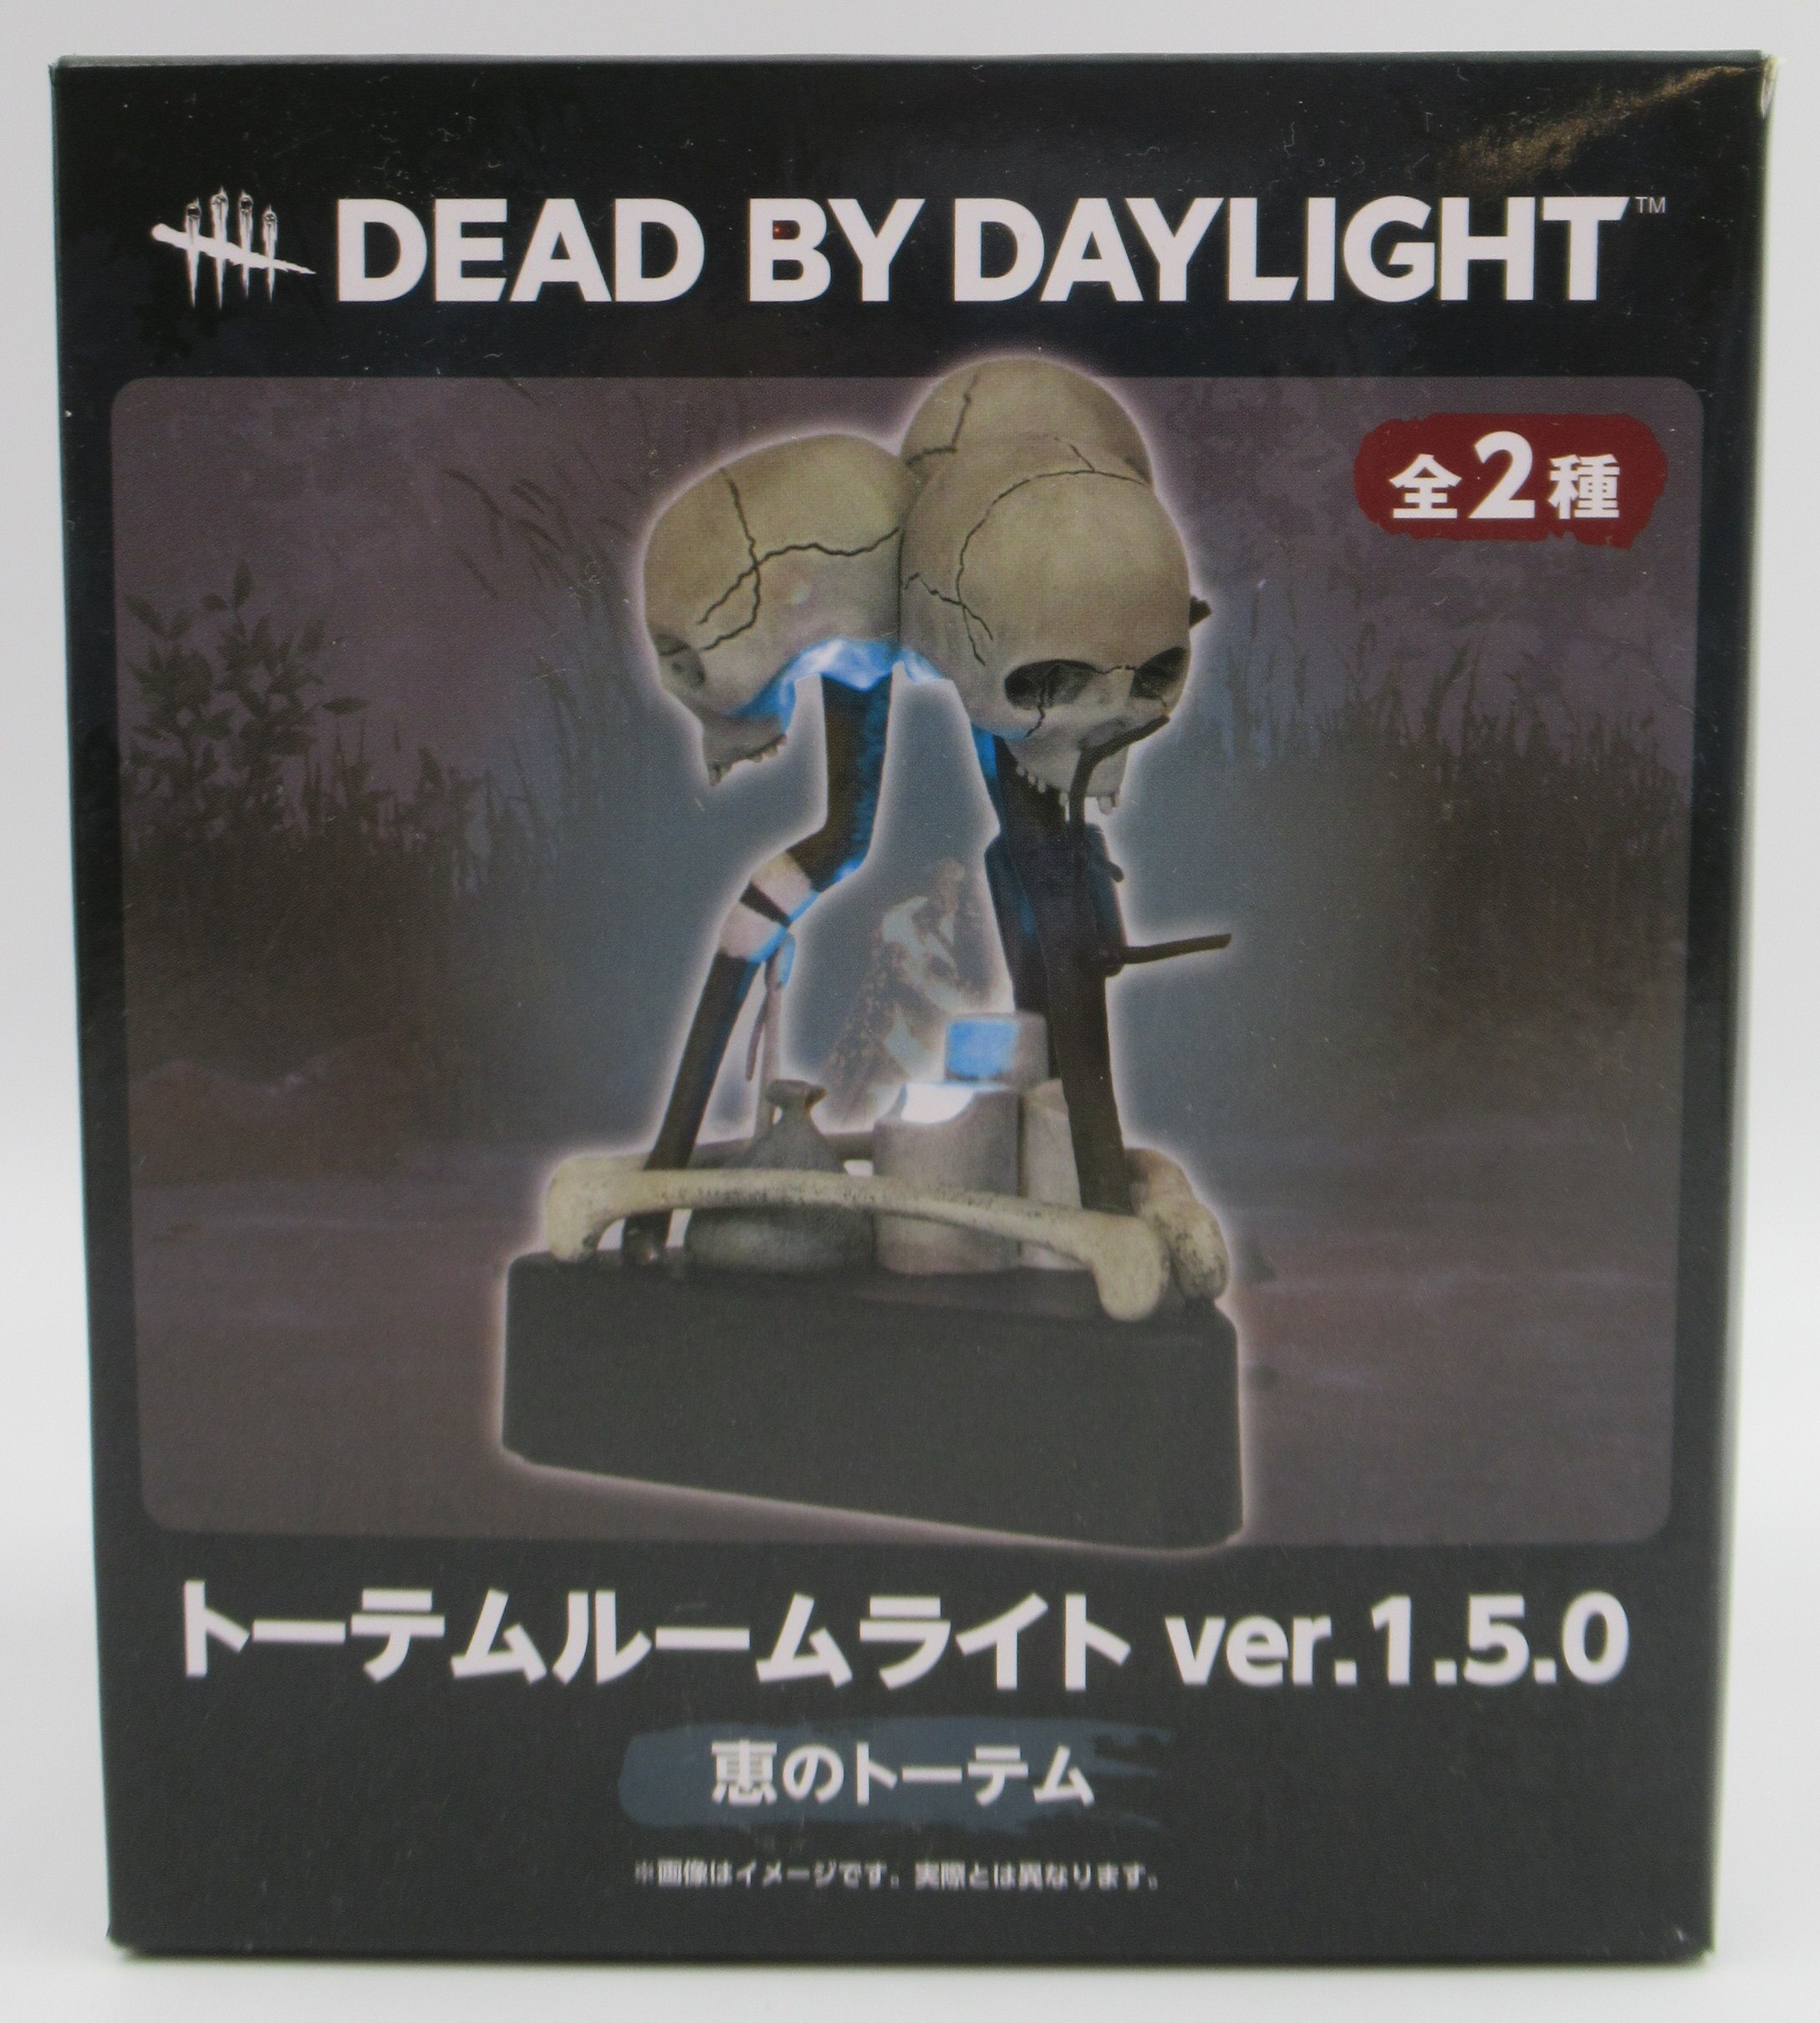 Dead by daylight トーテムルームライトver.1.5.0